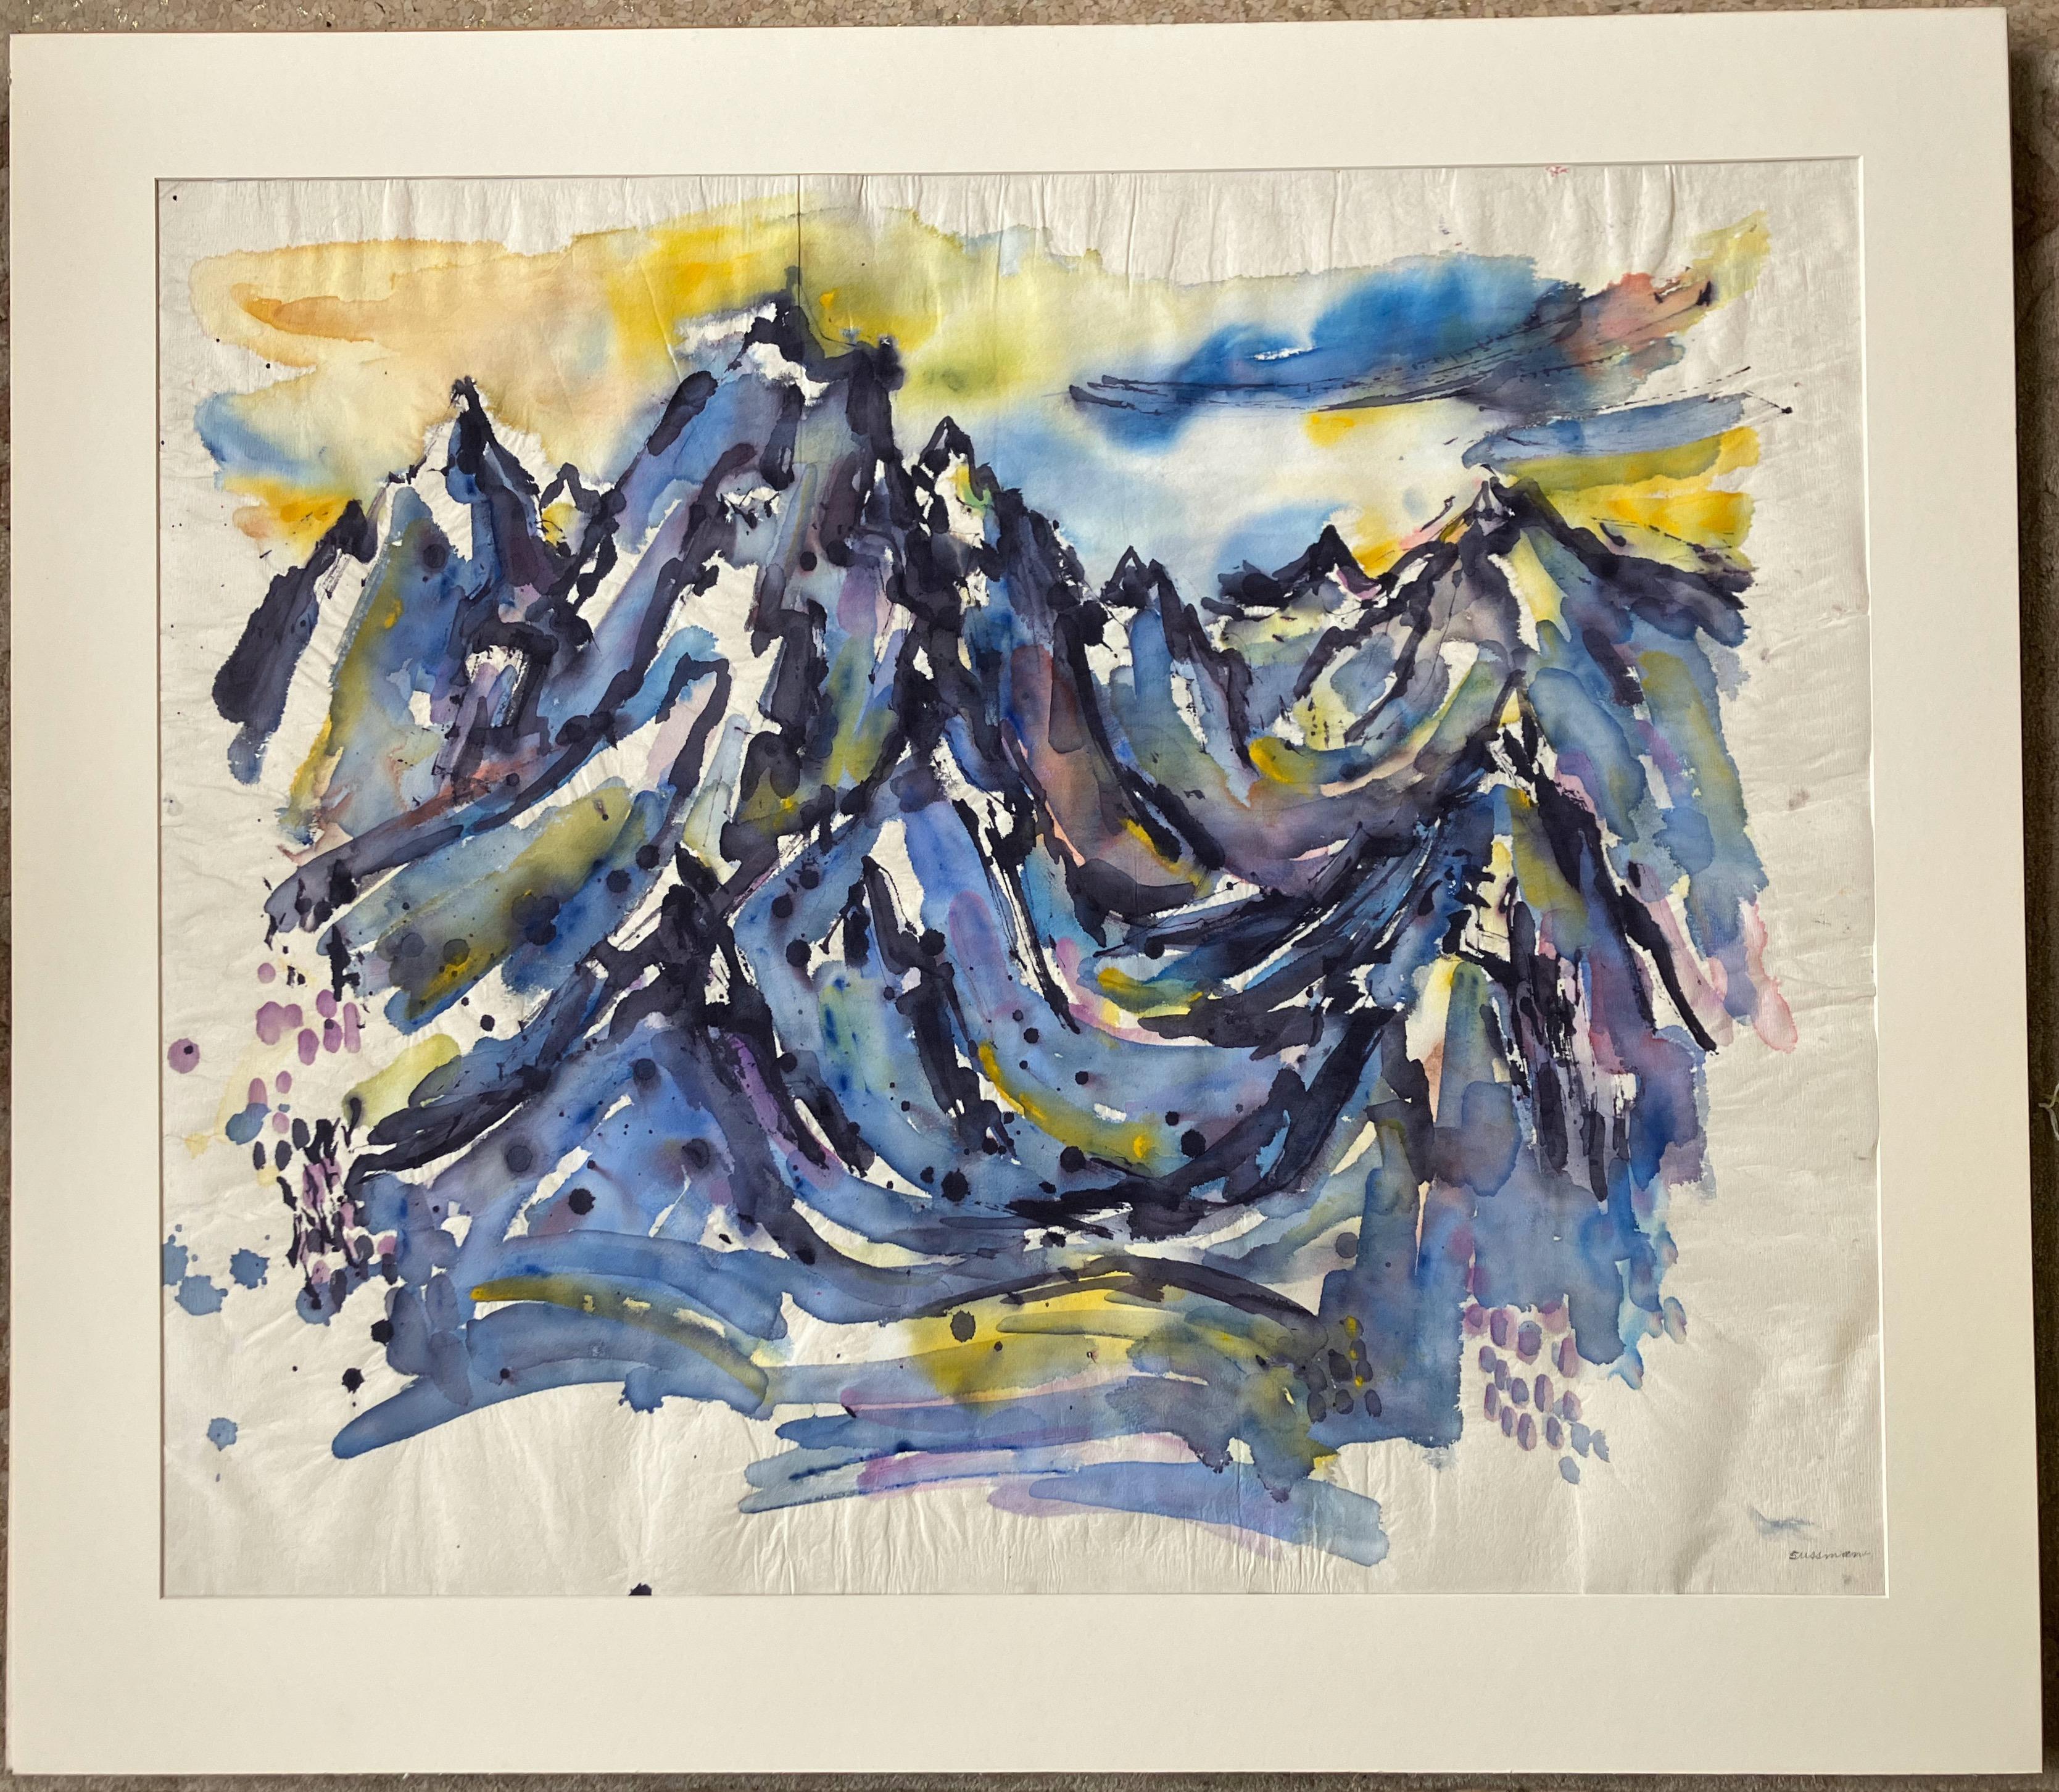 Artist: Richard Sussman – American (1908-1971)
Title: Tetons
Year: Circa 1960
Medium: Watercolor on handmade paper
Image size: 29.5 x 35 inches. 
Matted size: 36 x 41.5 inches
Signature: Signed lower right
Condition: Very good

This vibrant